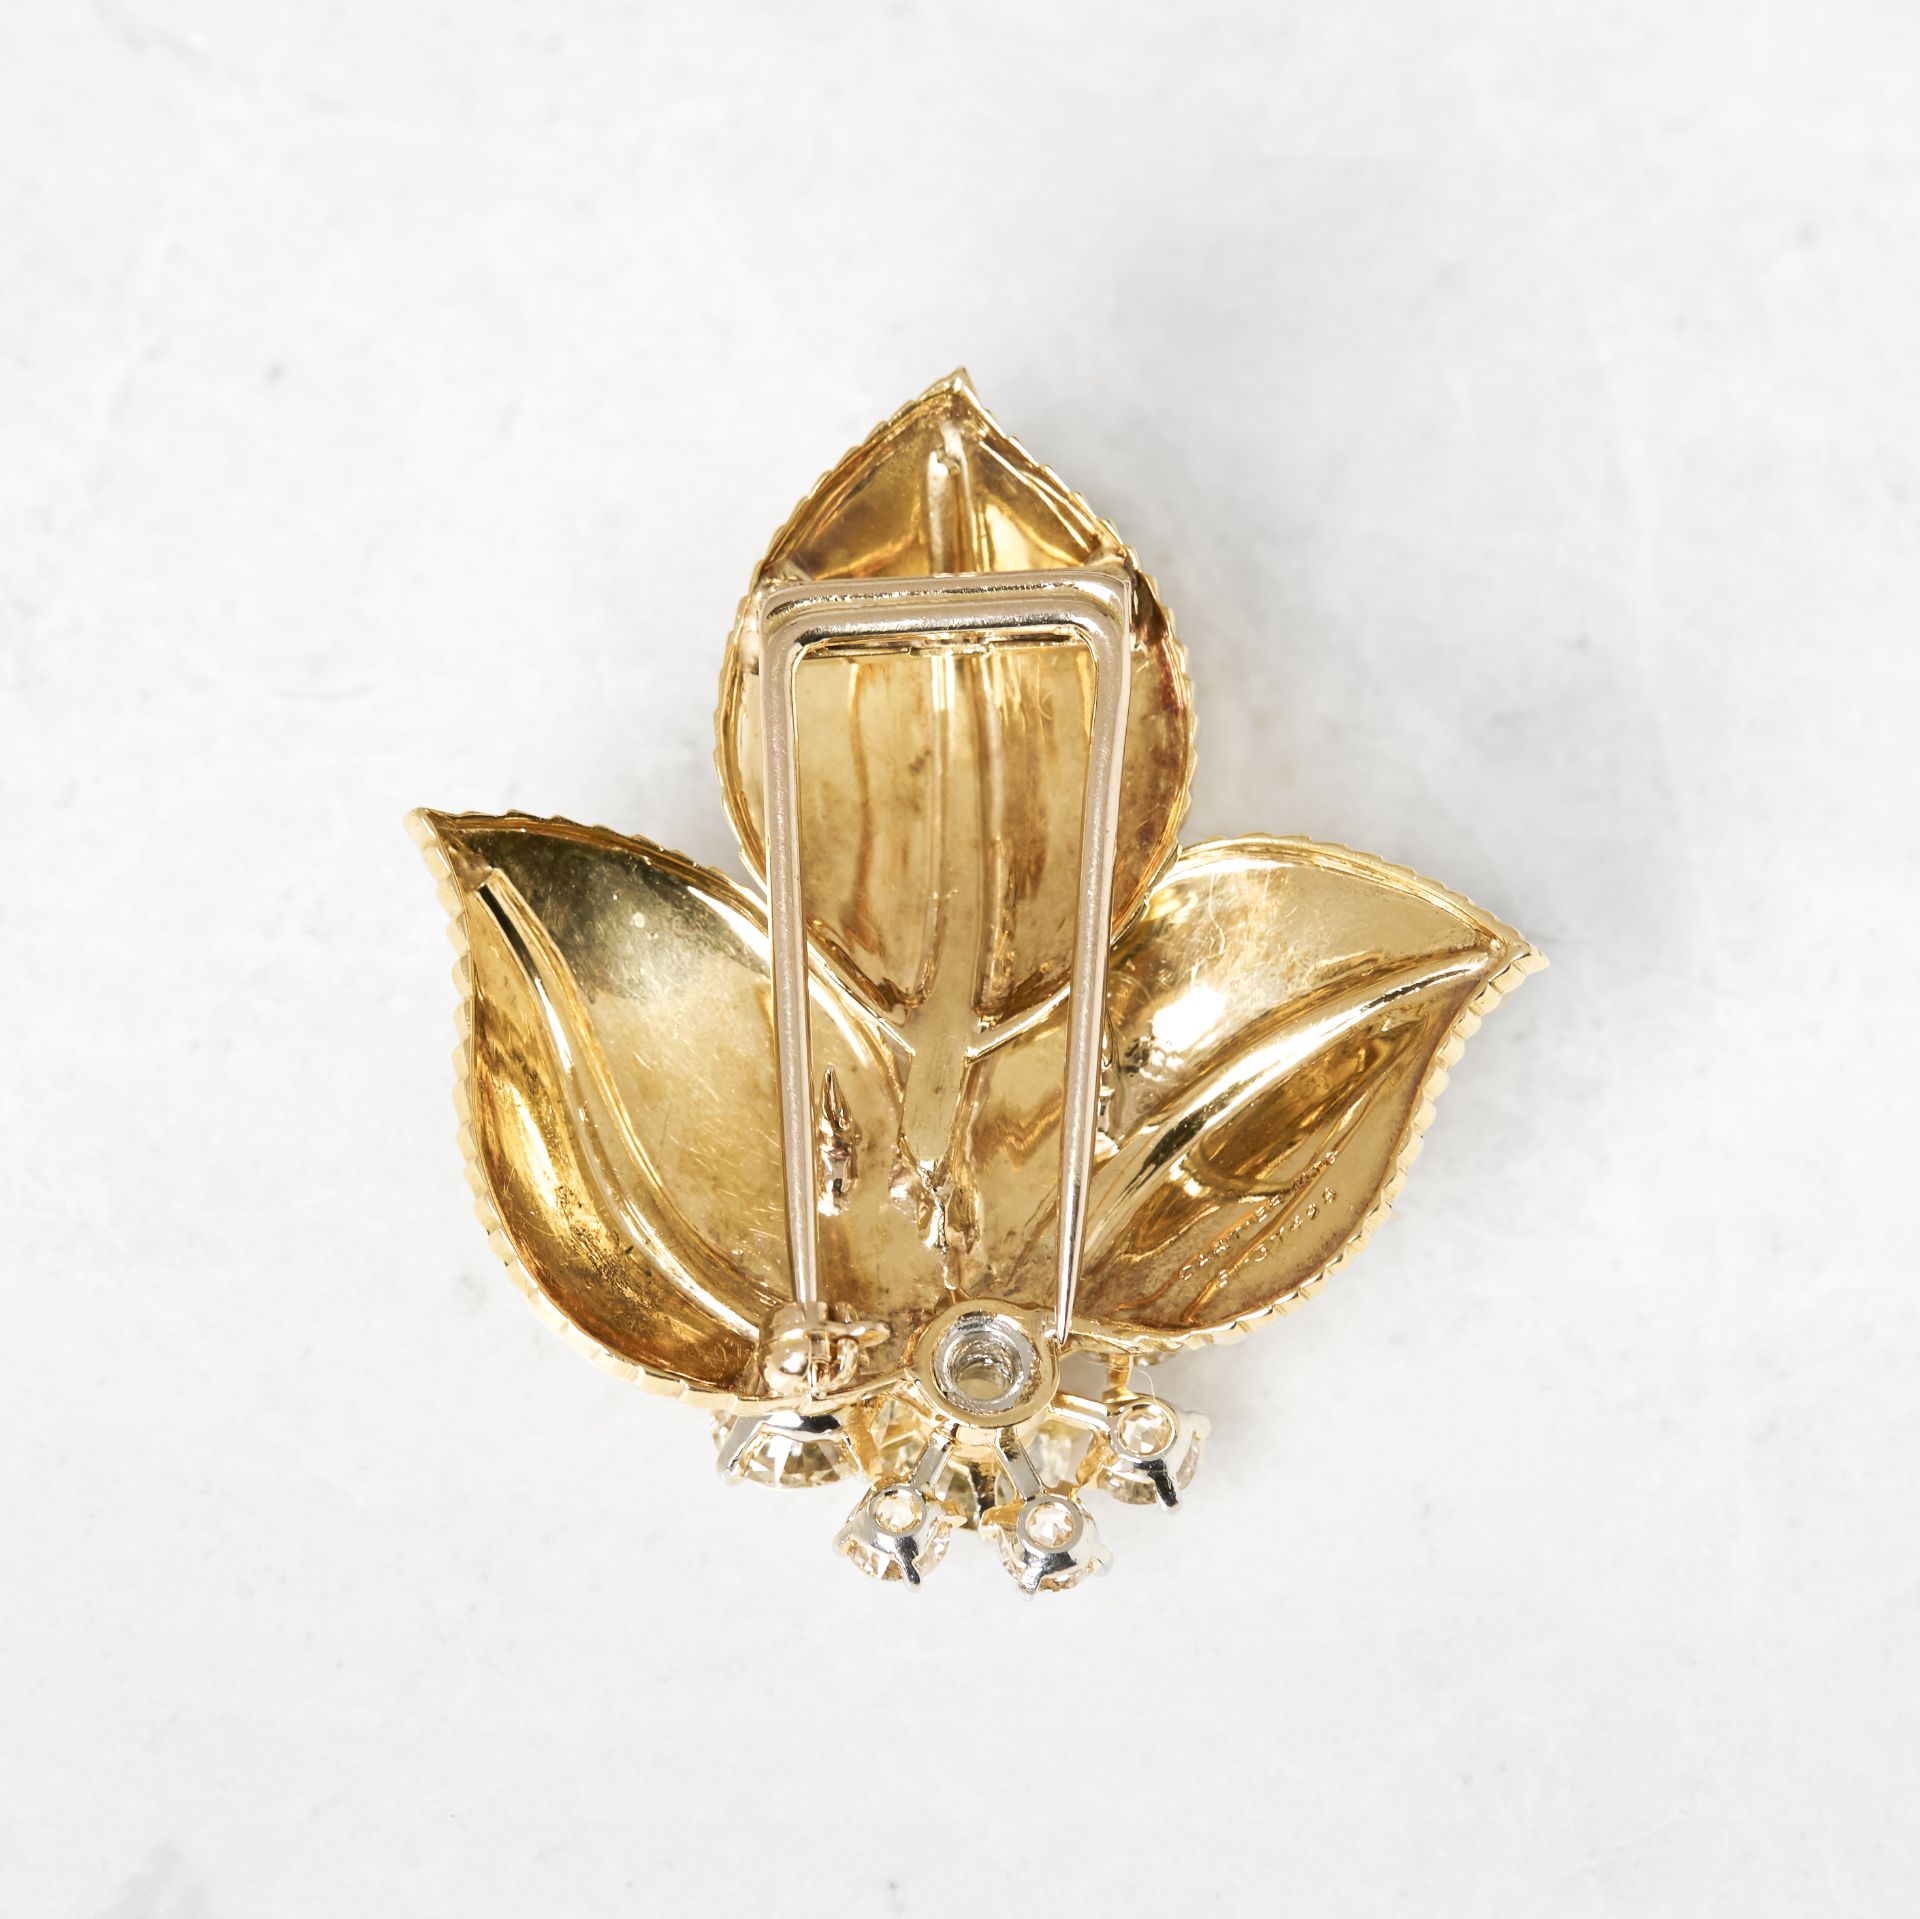 Cartier 18k Yellow Gold Diamond Vintage Leaf Brooch with Presentation Box - Image 3 of 16